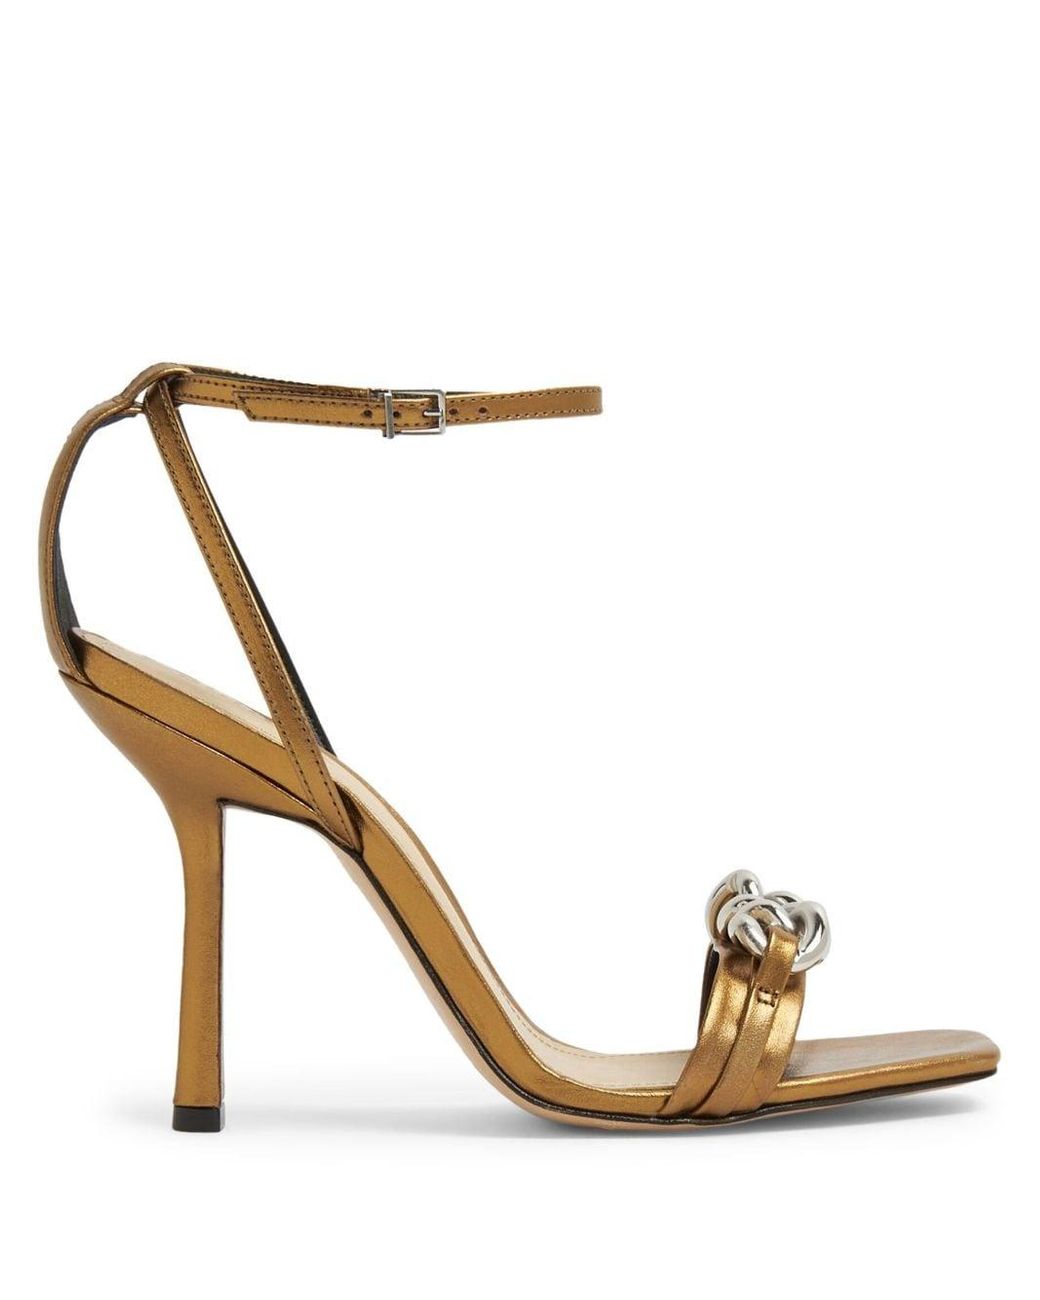 SCHUTZ SHOES Lindsay 90mm Leather Sandals in Metallic | Lyst